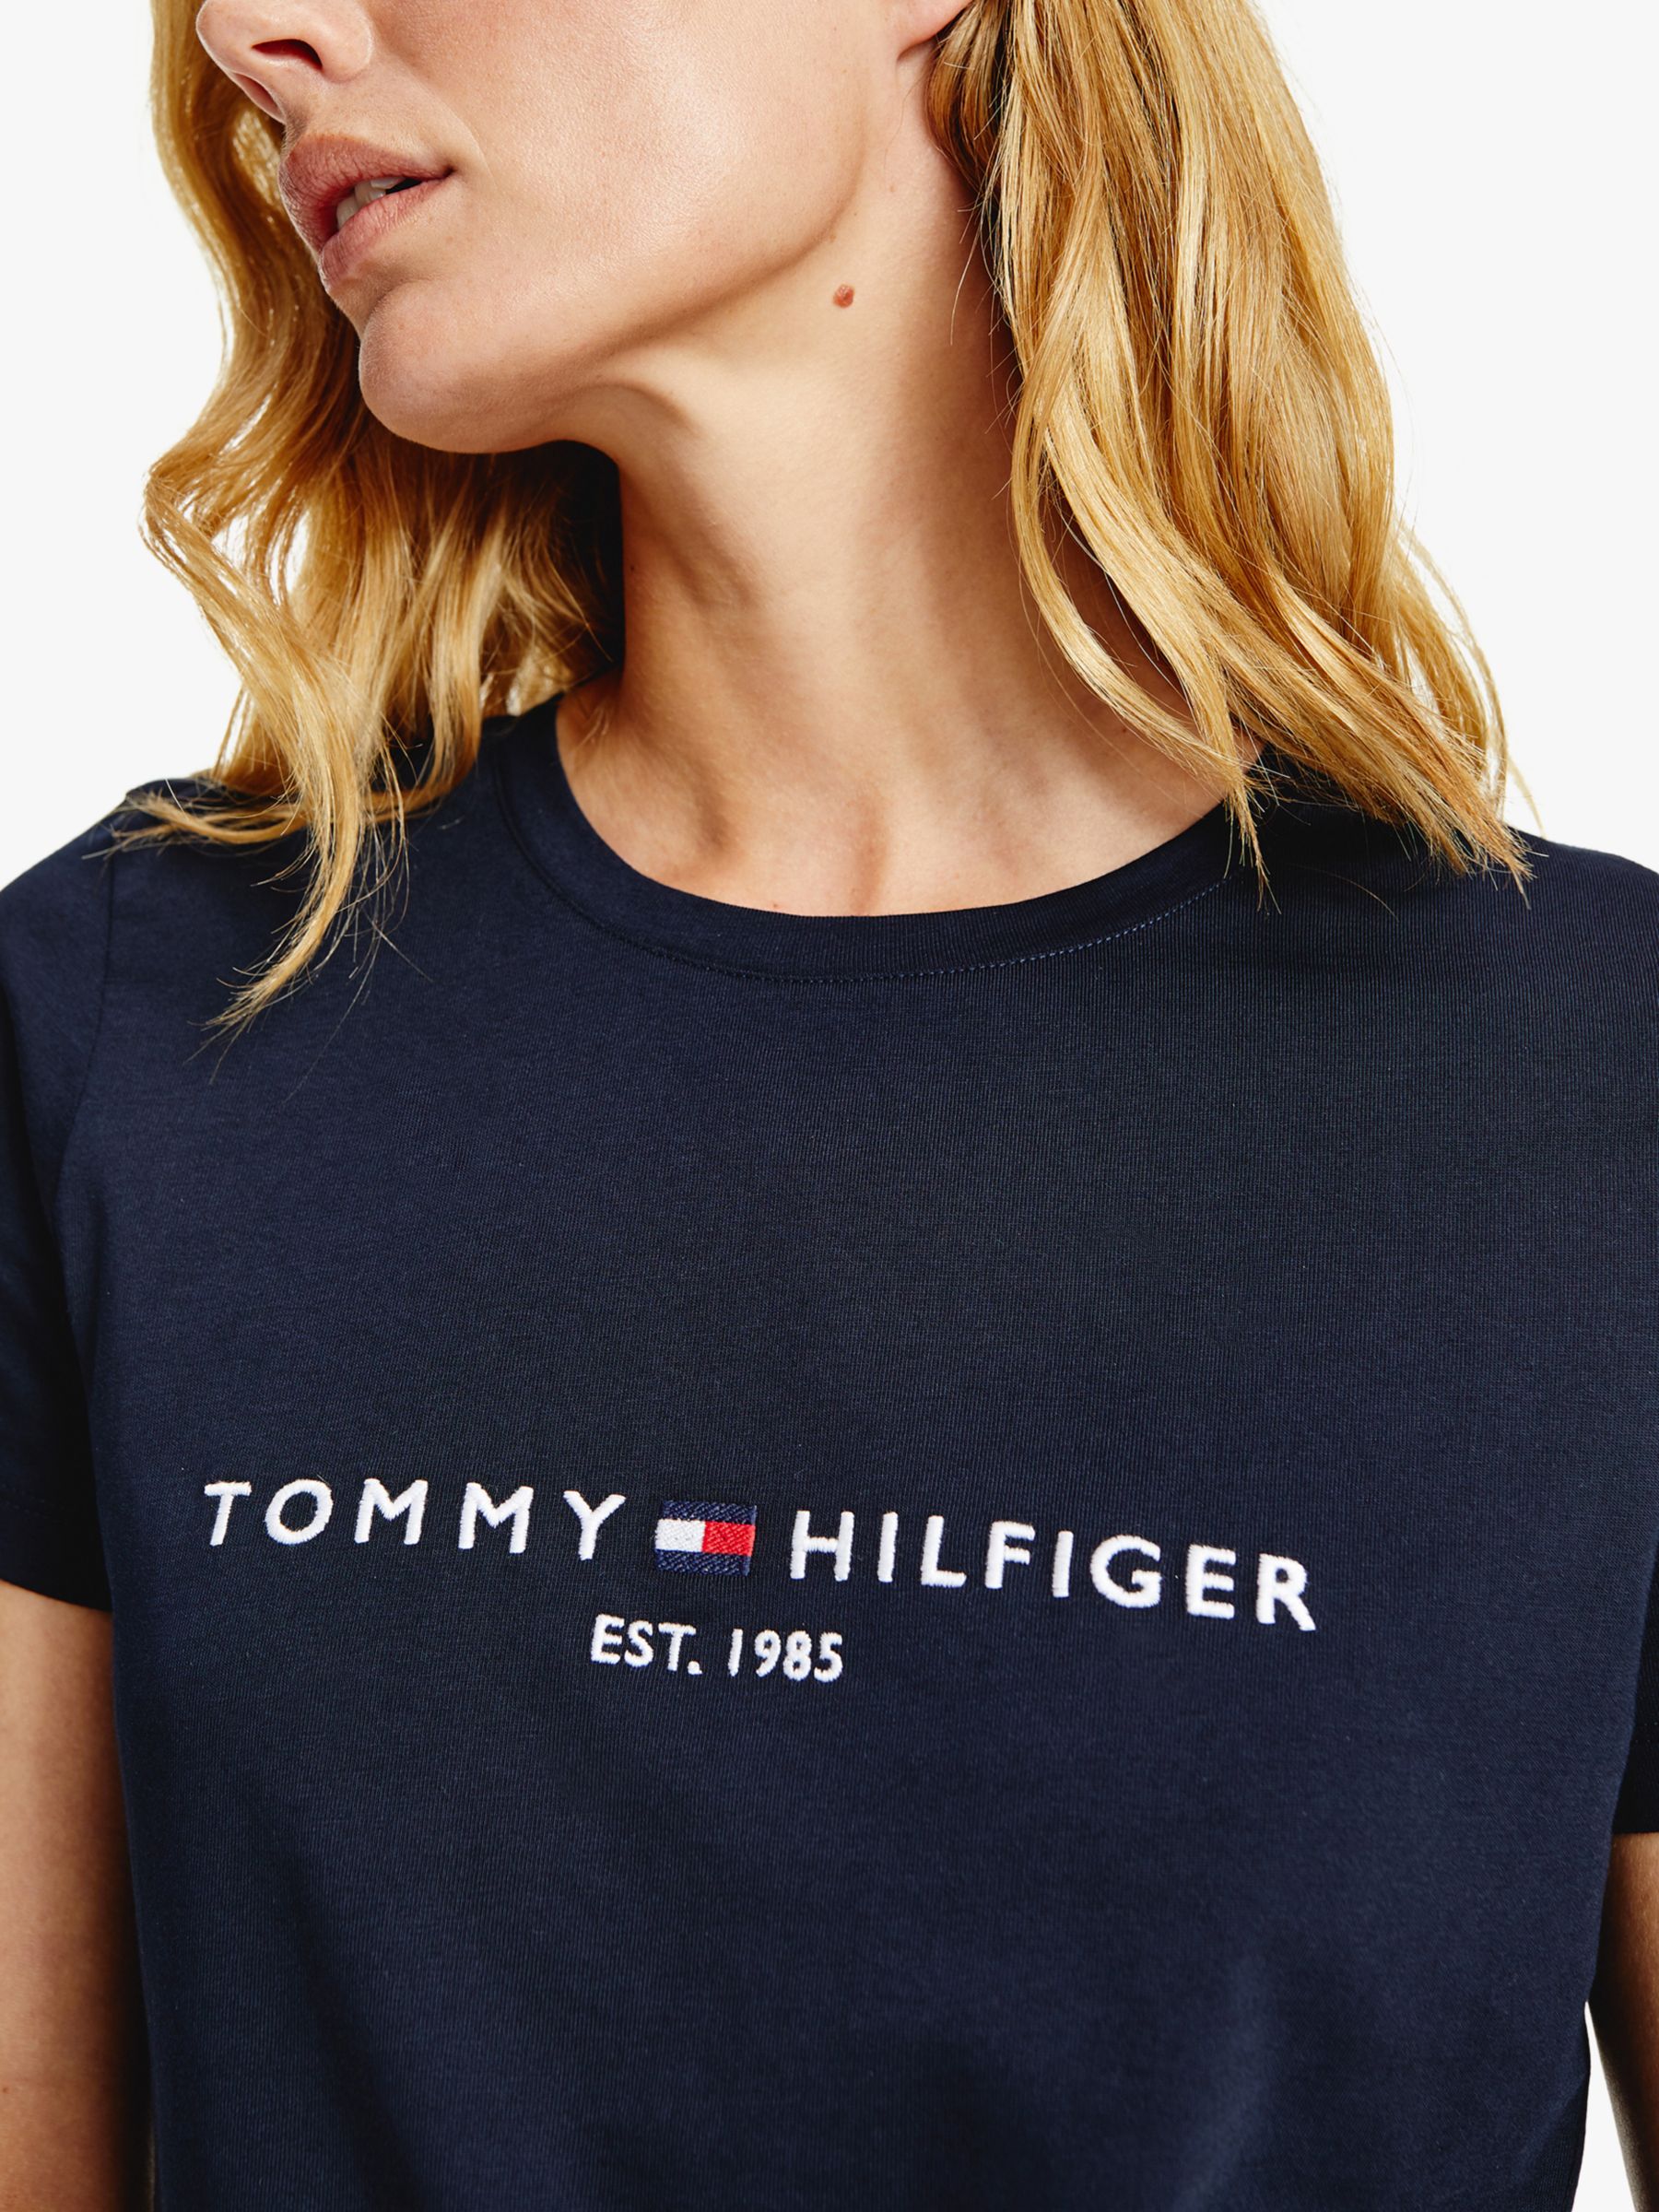 Buy Women's Shirts Tommy Hilfiger Tops Online